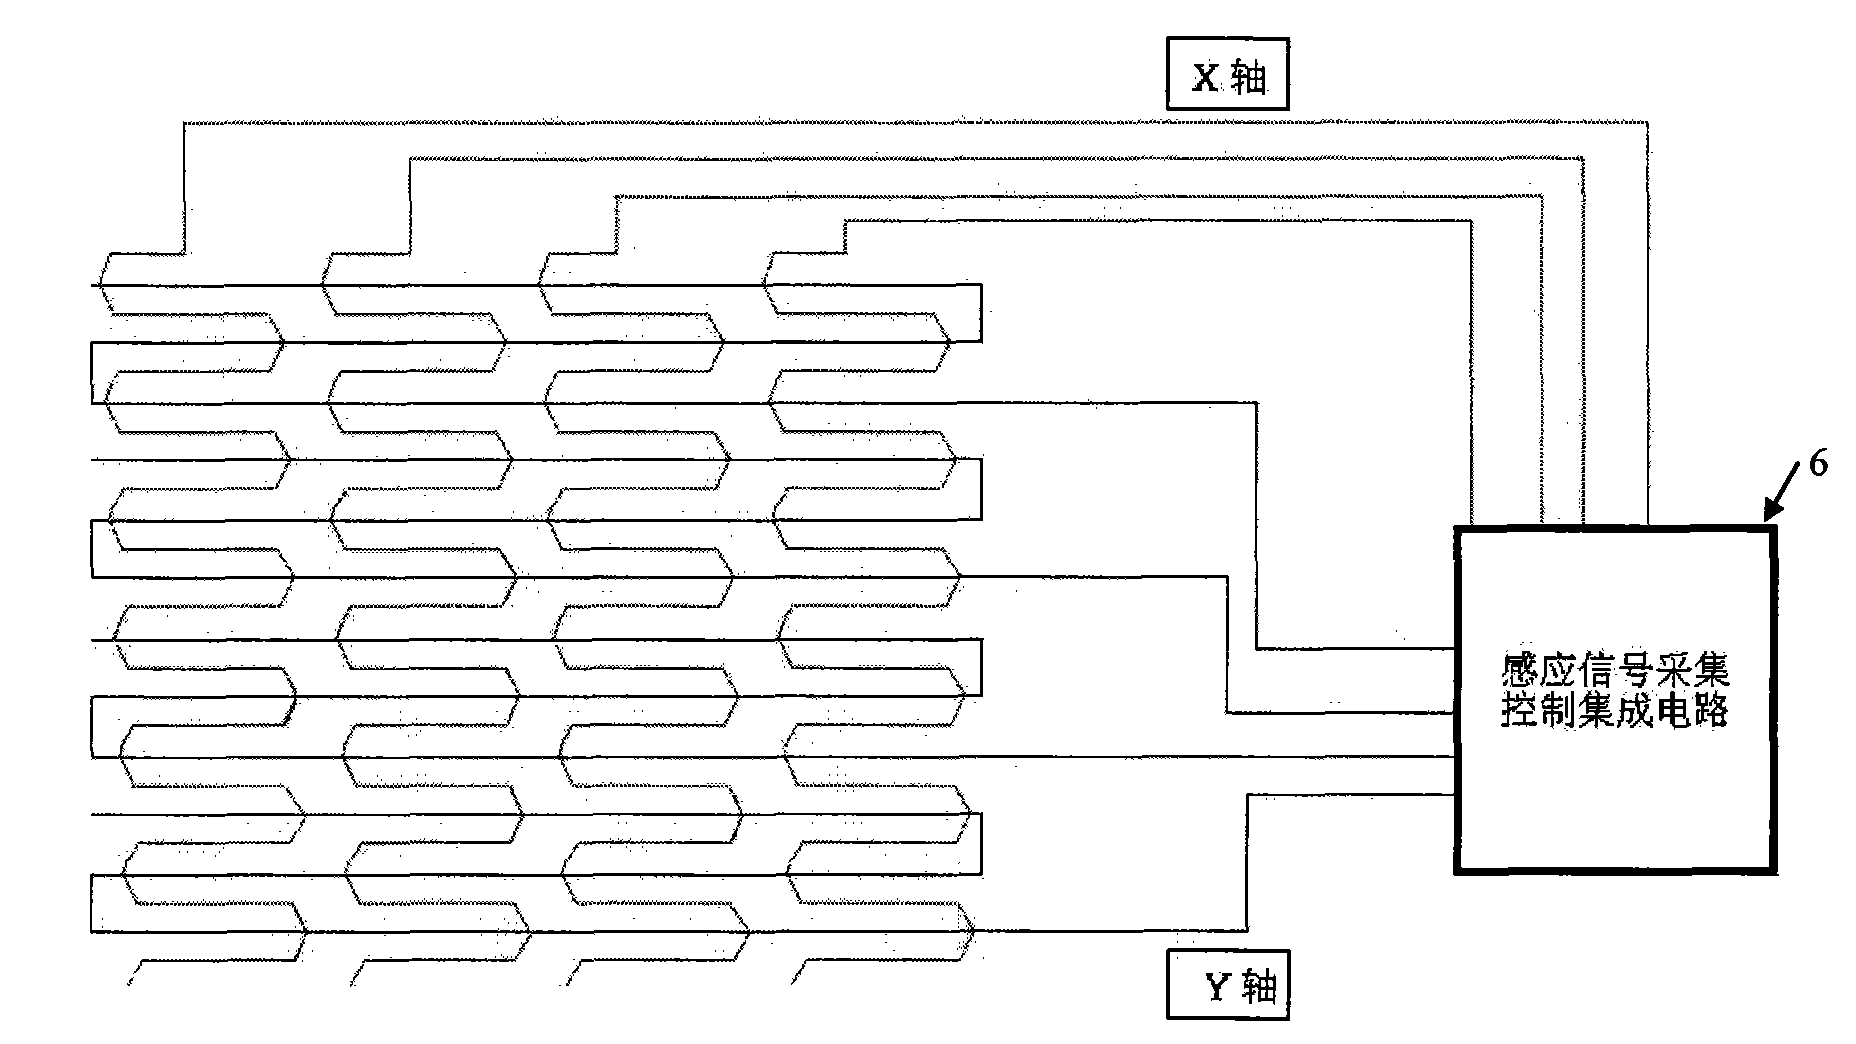 Imaging touch control film and large-screen interactive media system applying imaging touch control film